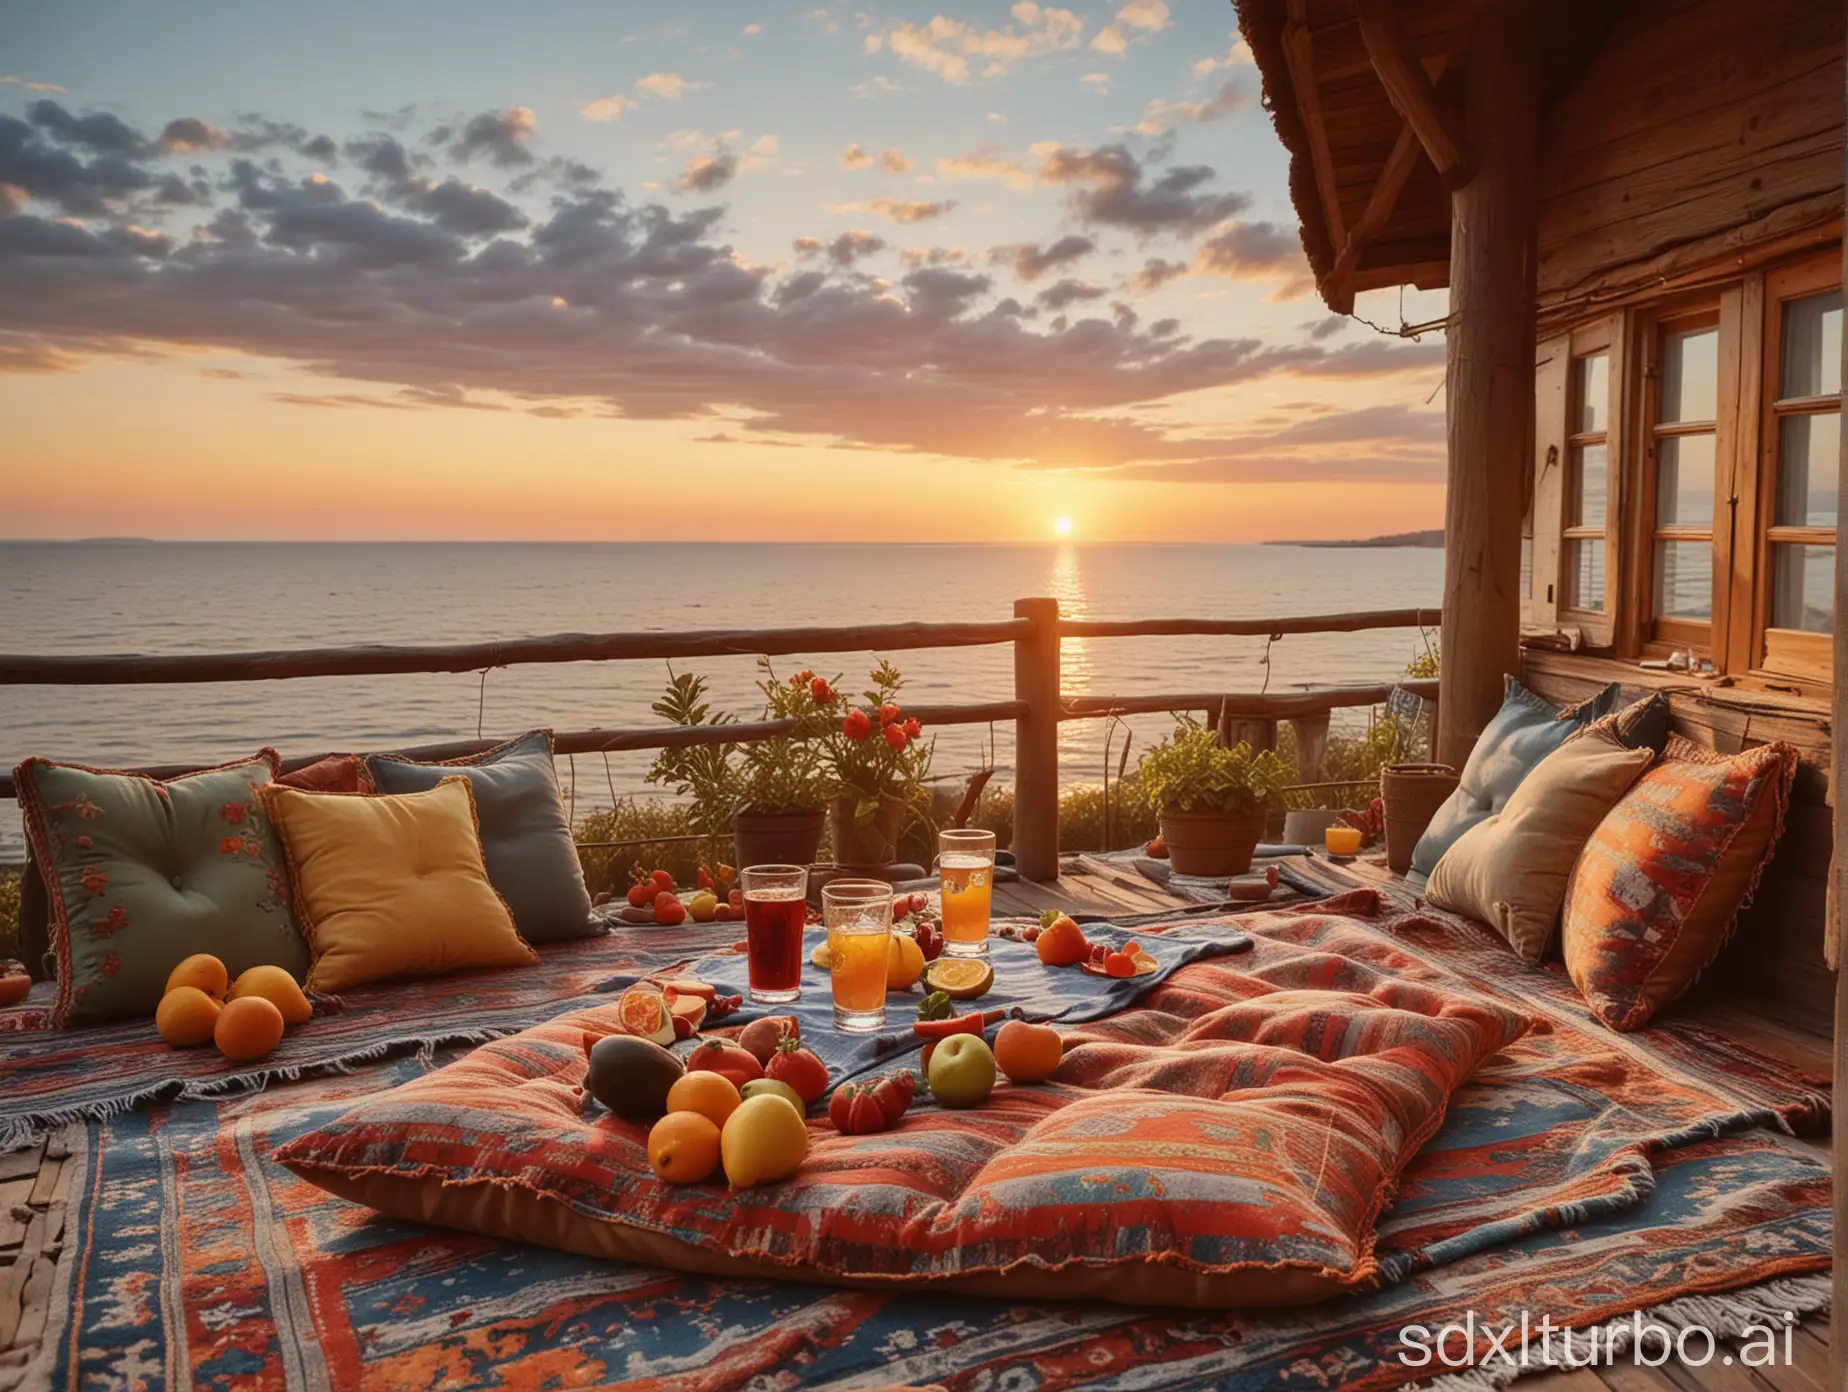 amazing sunset, beautiful sea view. Picnic setup with cushions and carpets on an old Bavarian style rug, including a small table with fruit and drinks. Overlooking the seascape and sky from a wooden house on the roof, in the style of impressionist artist.fuji provia, Close-up shot